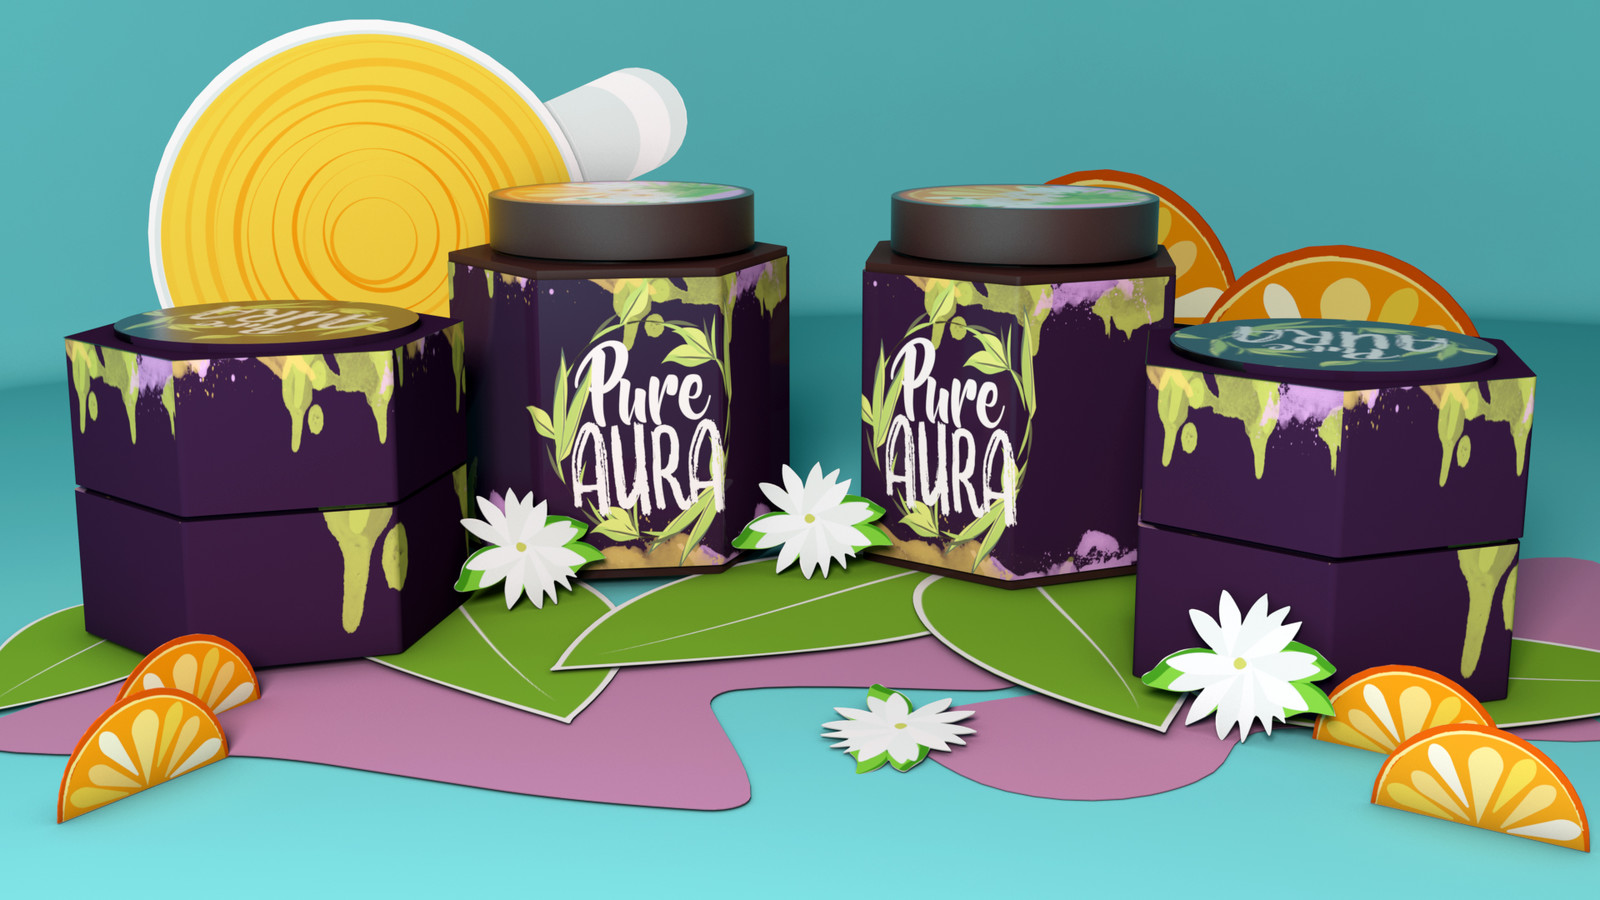 After the initial package design concepts where submitted, these containers were constructed using 3D software to demonstrate how the packages would look once produced for sale. The design on the packaging were created using both Photoshop and Illustrator